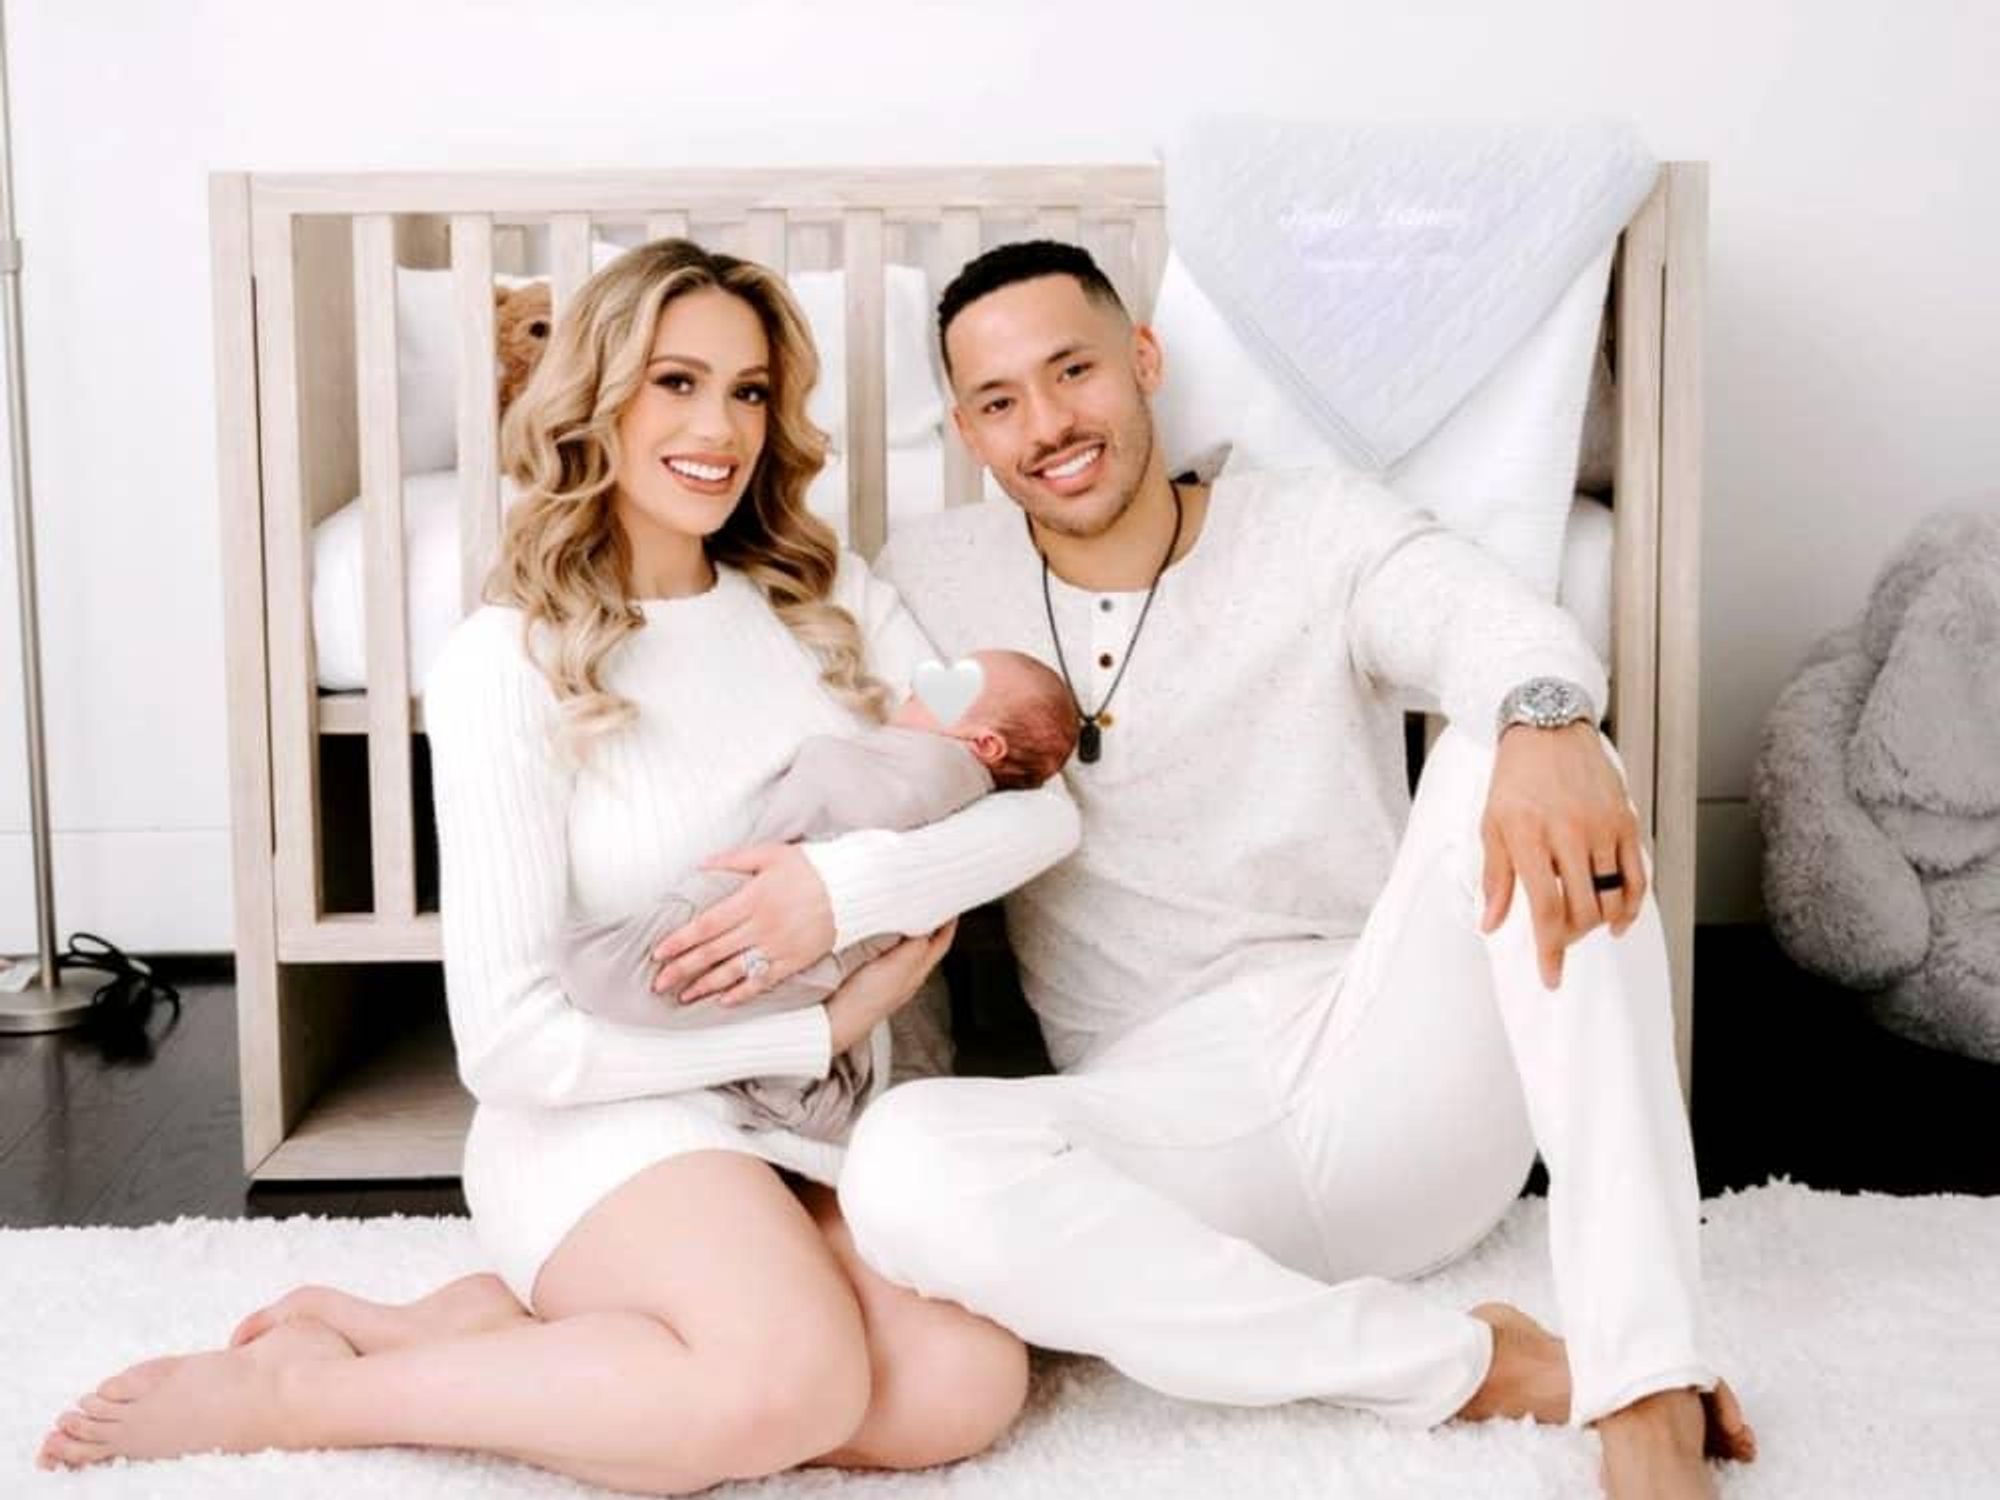 Houston Astros superstar shortstop and pageant queen wife announce birth of  first son - CultureMap Houston